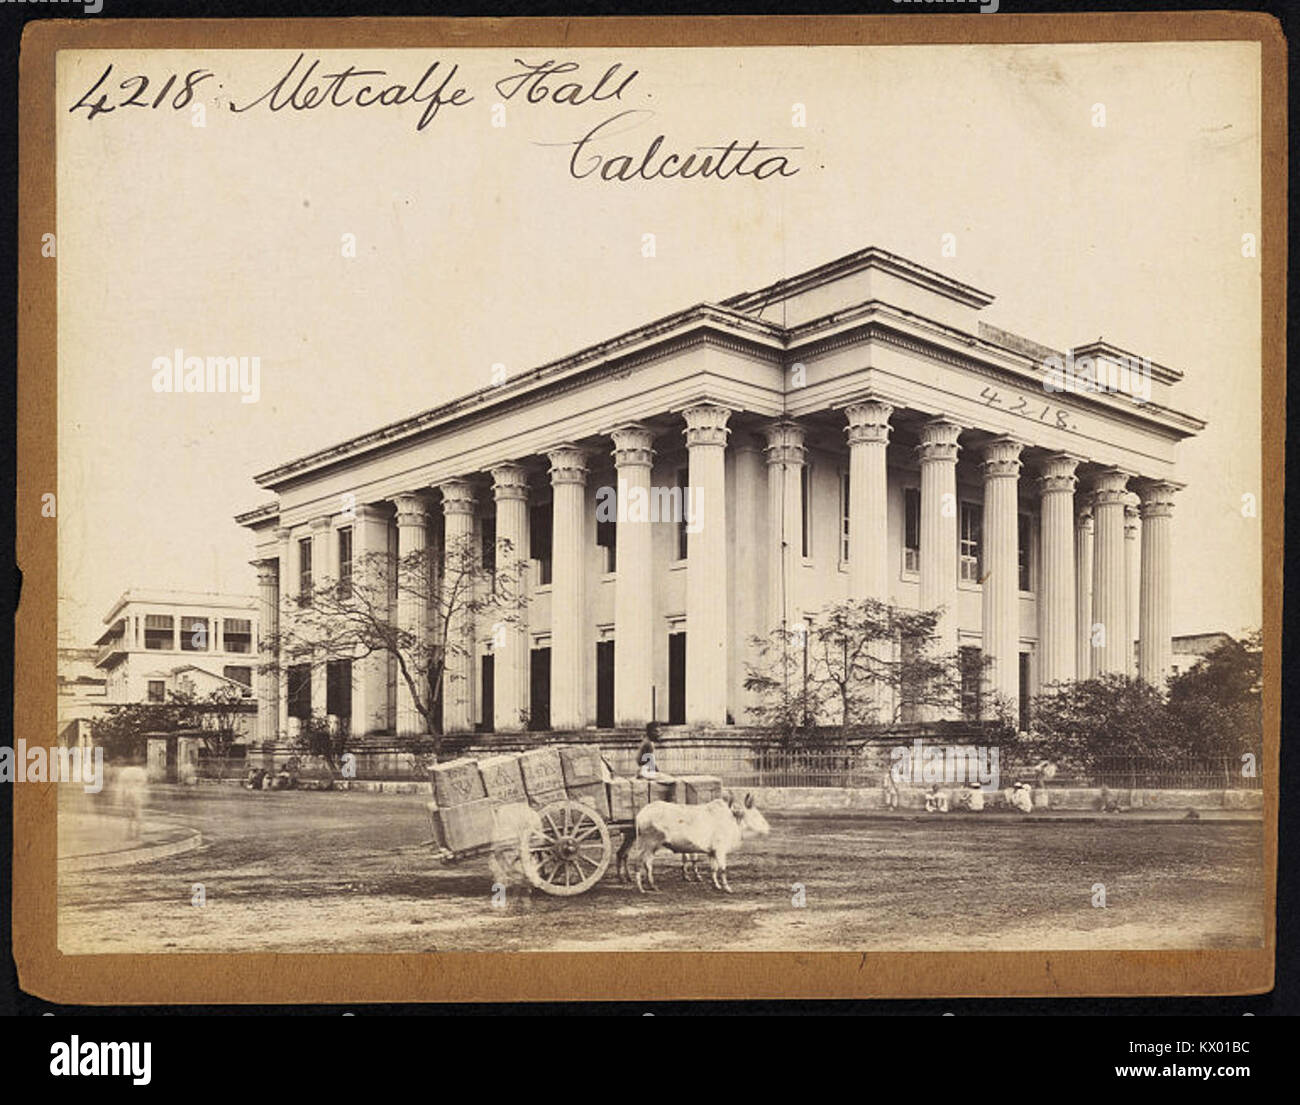 Metcalfe Hall, Calcutta by Francis Frith Stock Photo